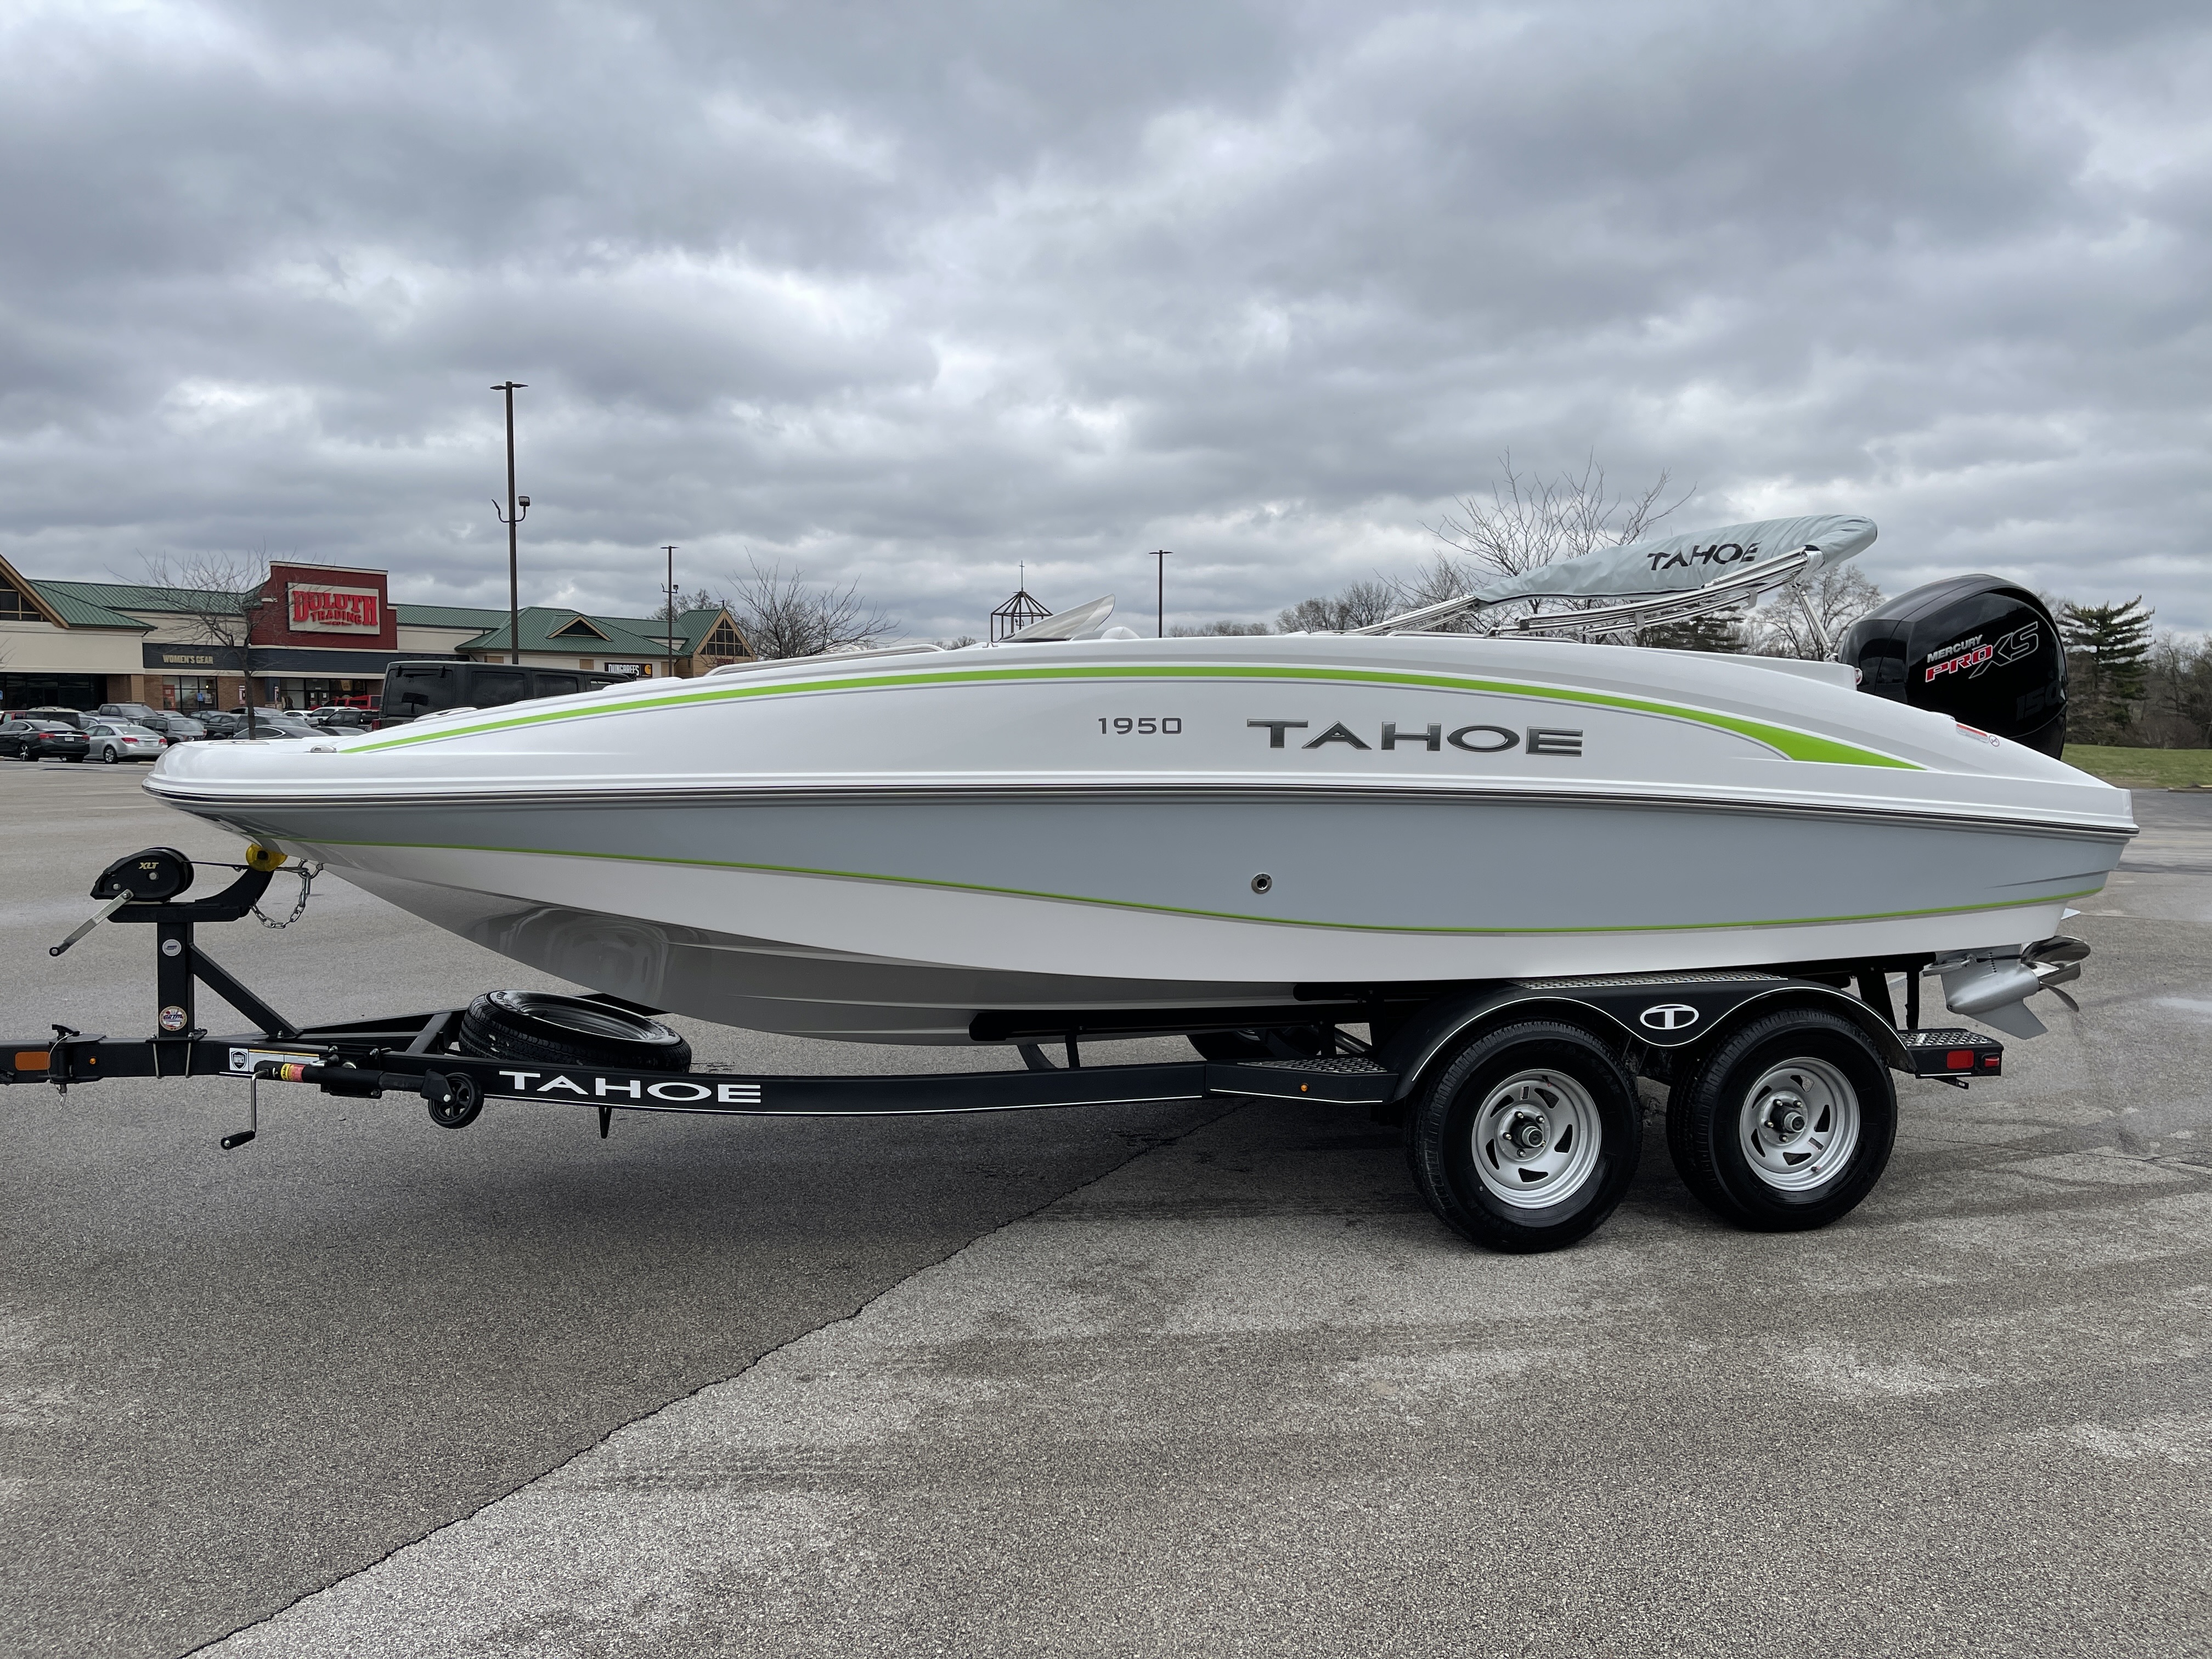 2022 Tahoe 1950 Power boat for sale in Colo Spgs, CO - image 4 